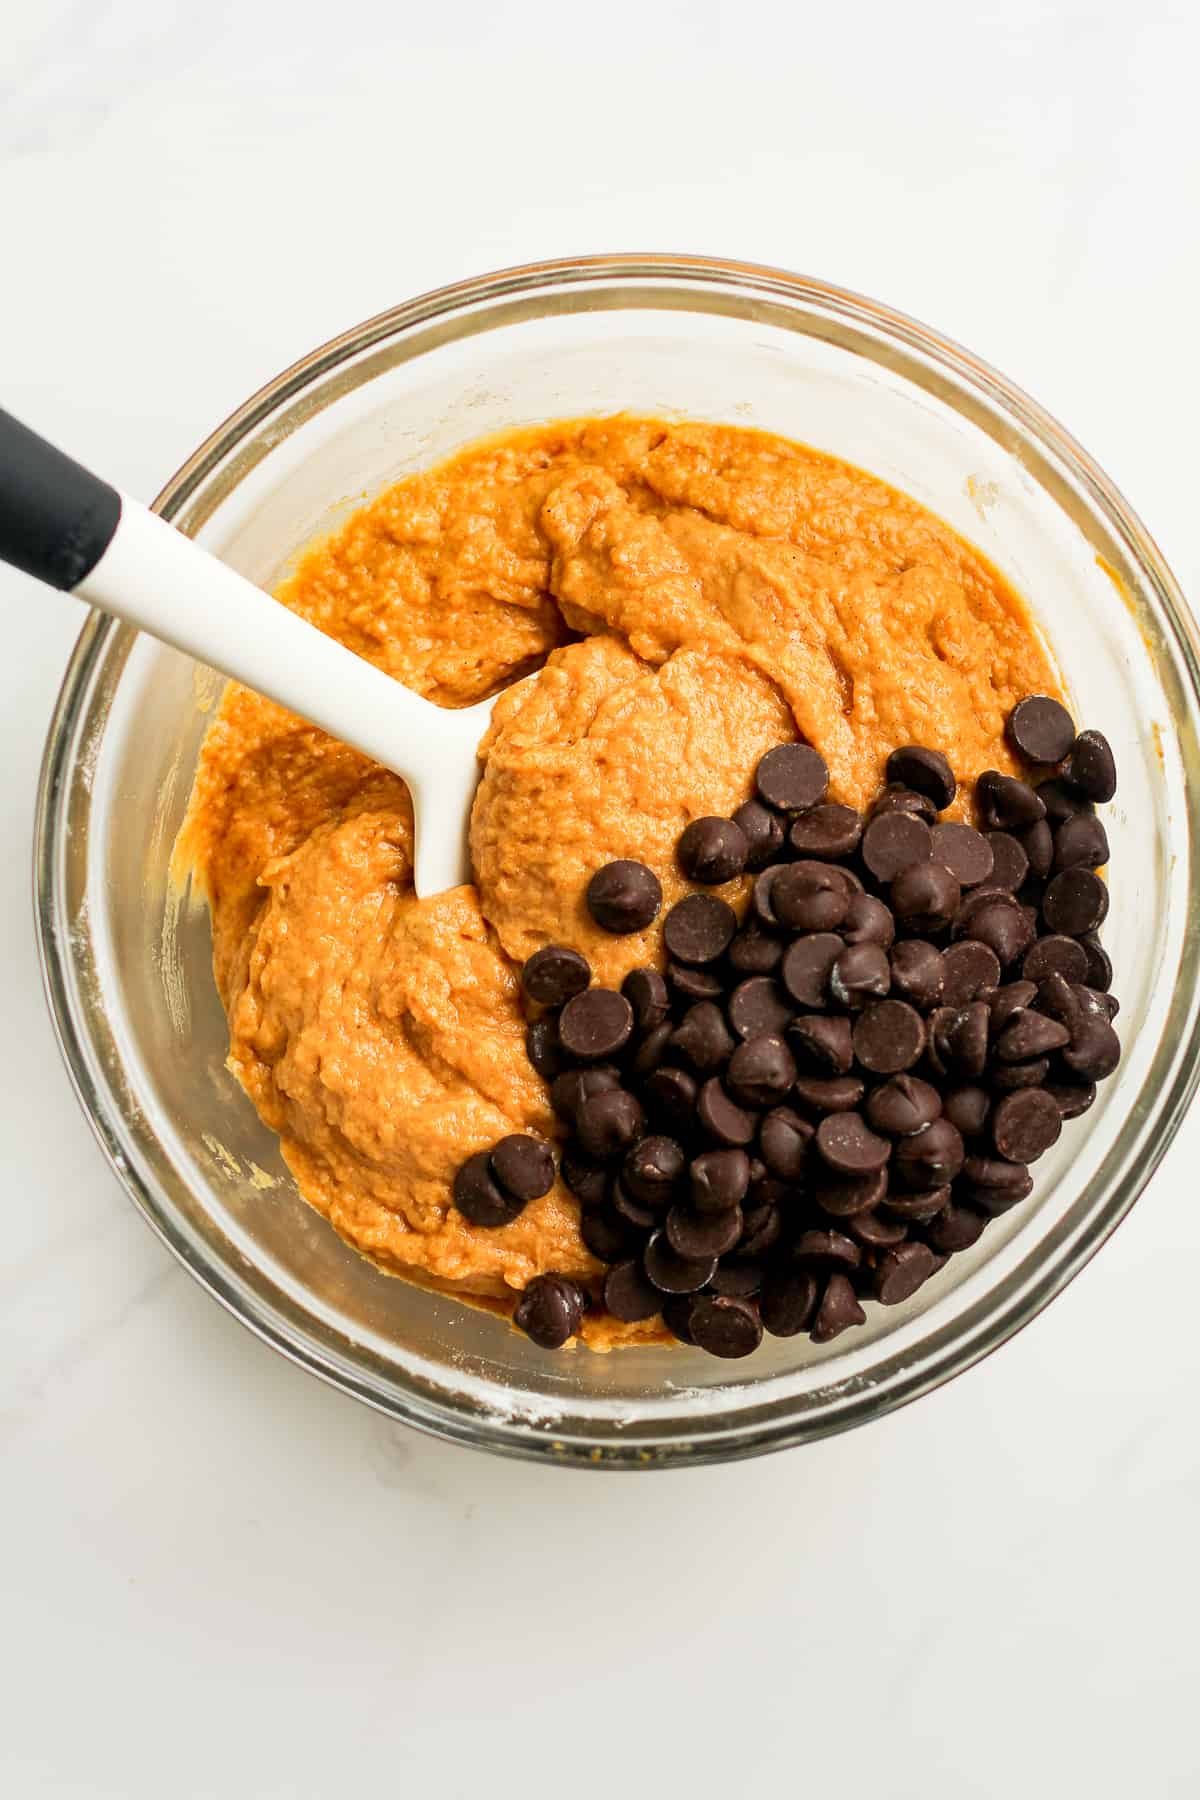 A bowl of the pumpkin batter plus chocolate chips.